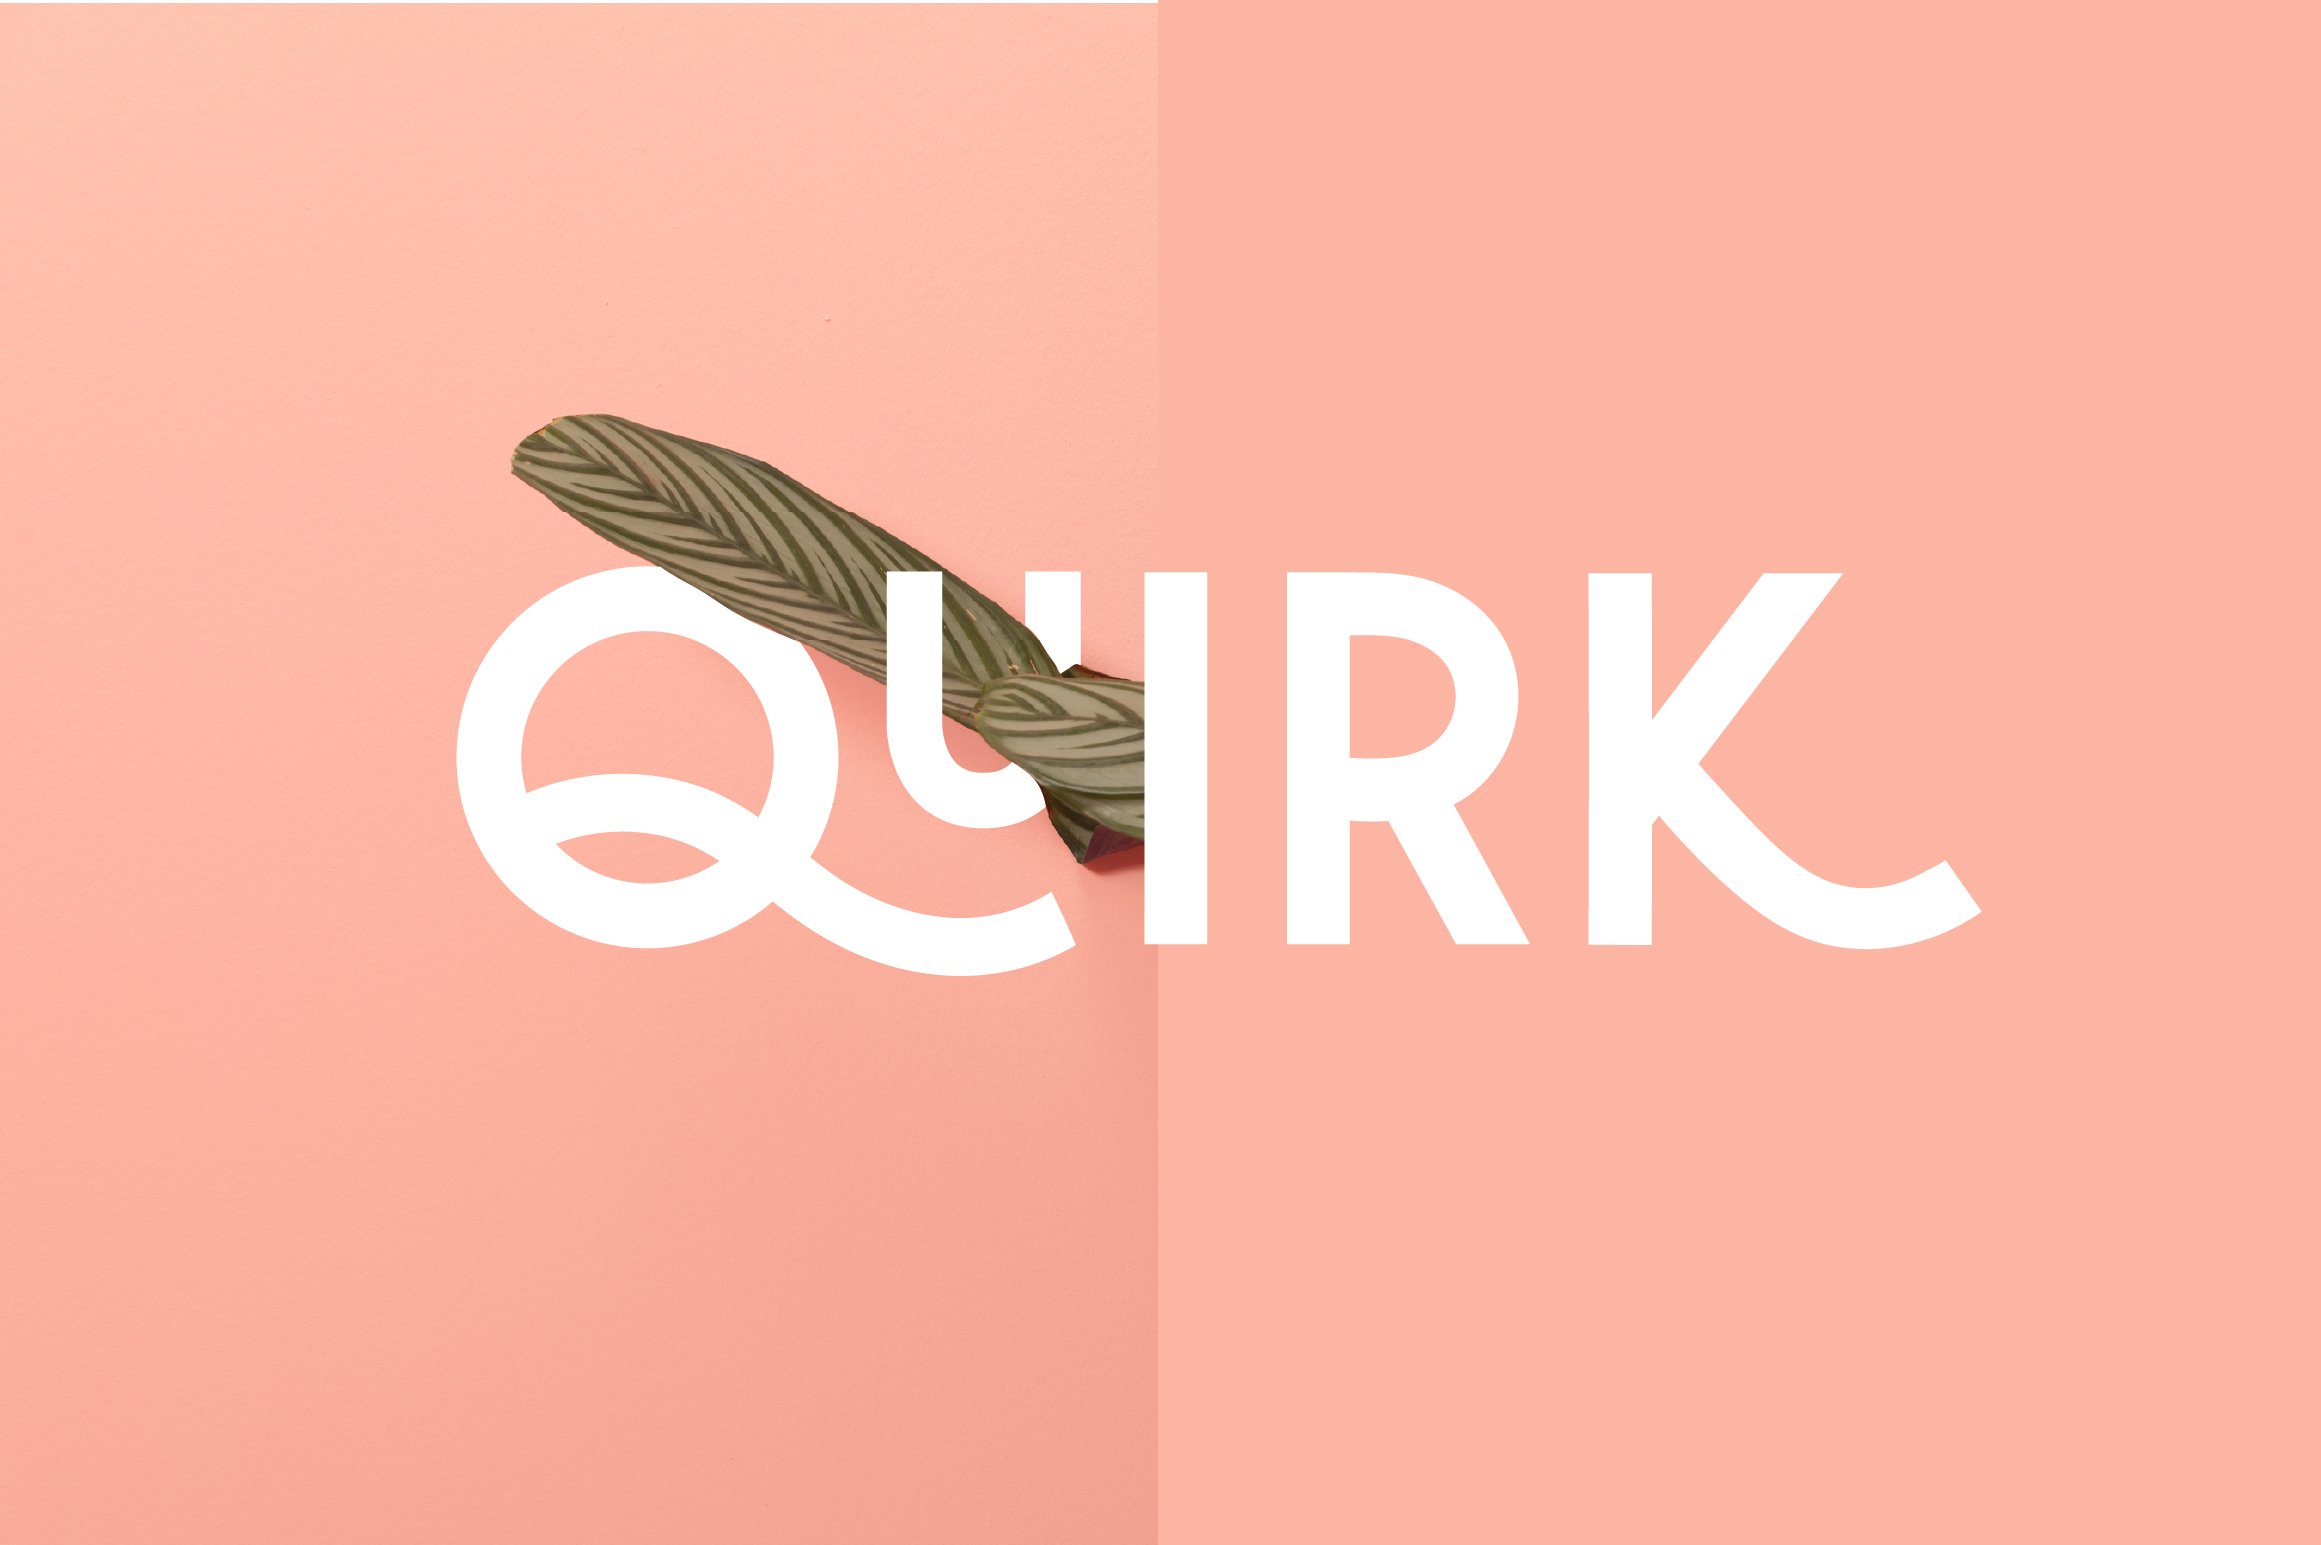 Quirk - Fun Display Font cover image.